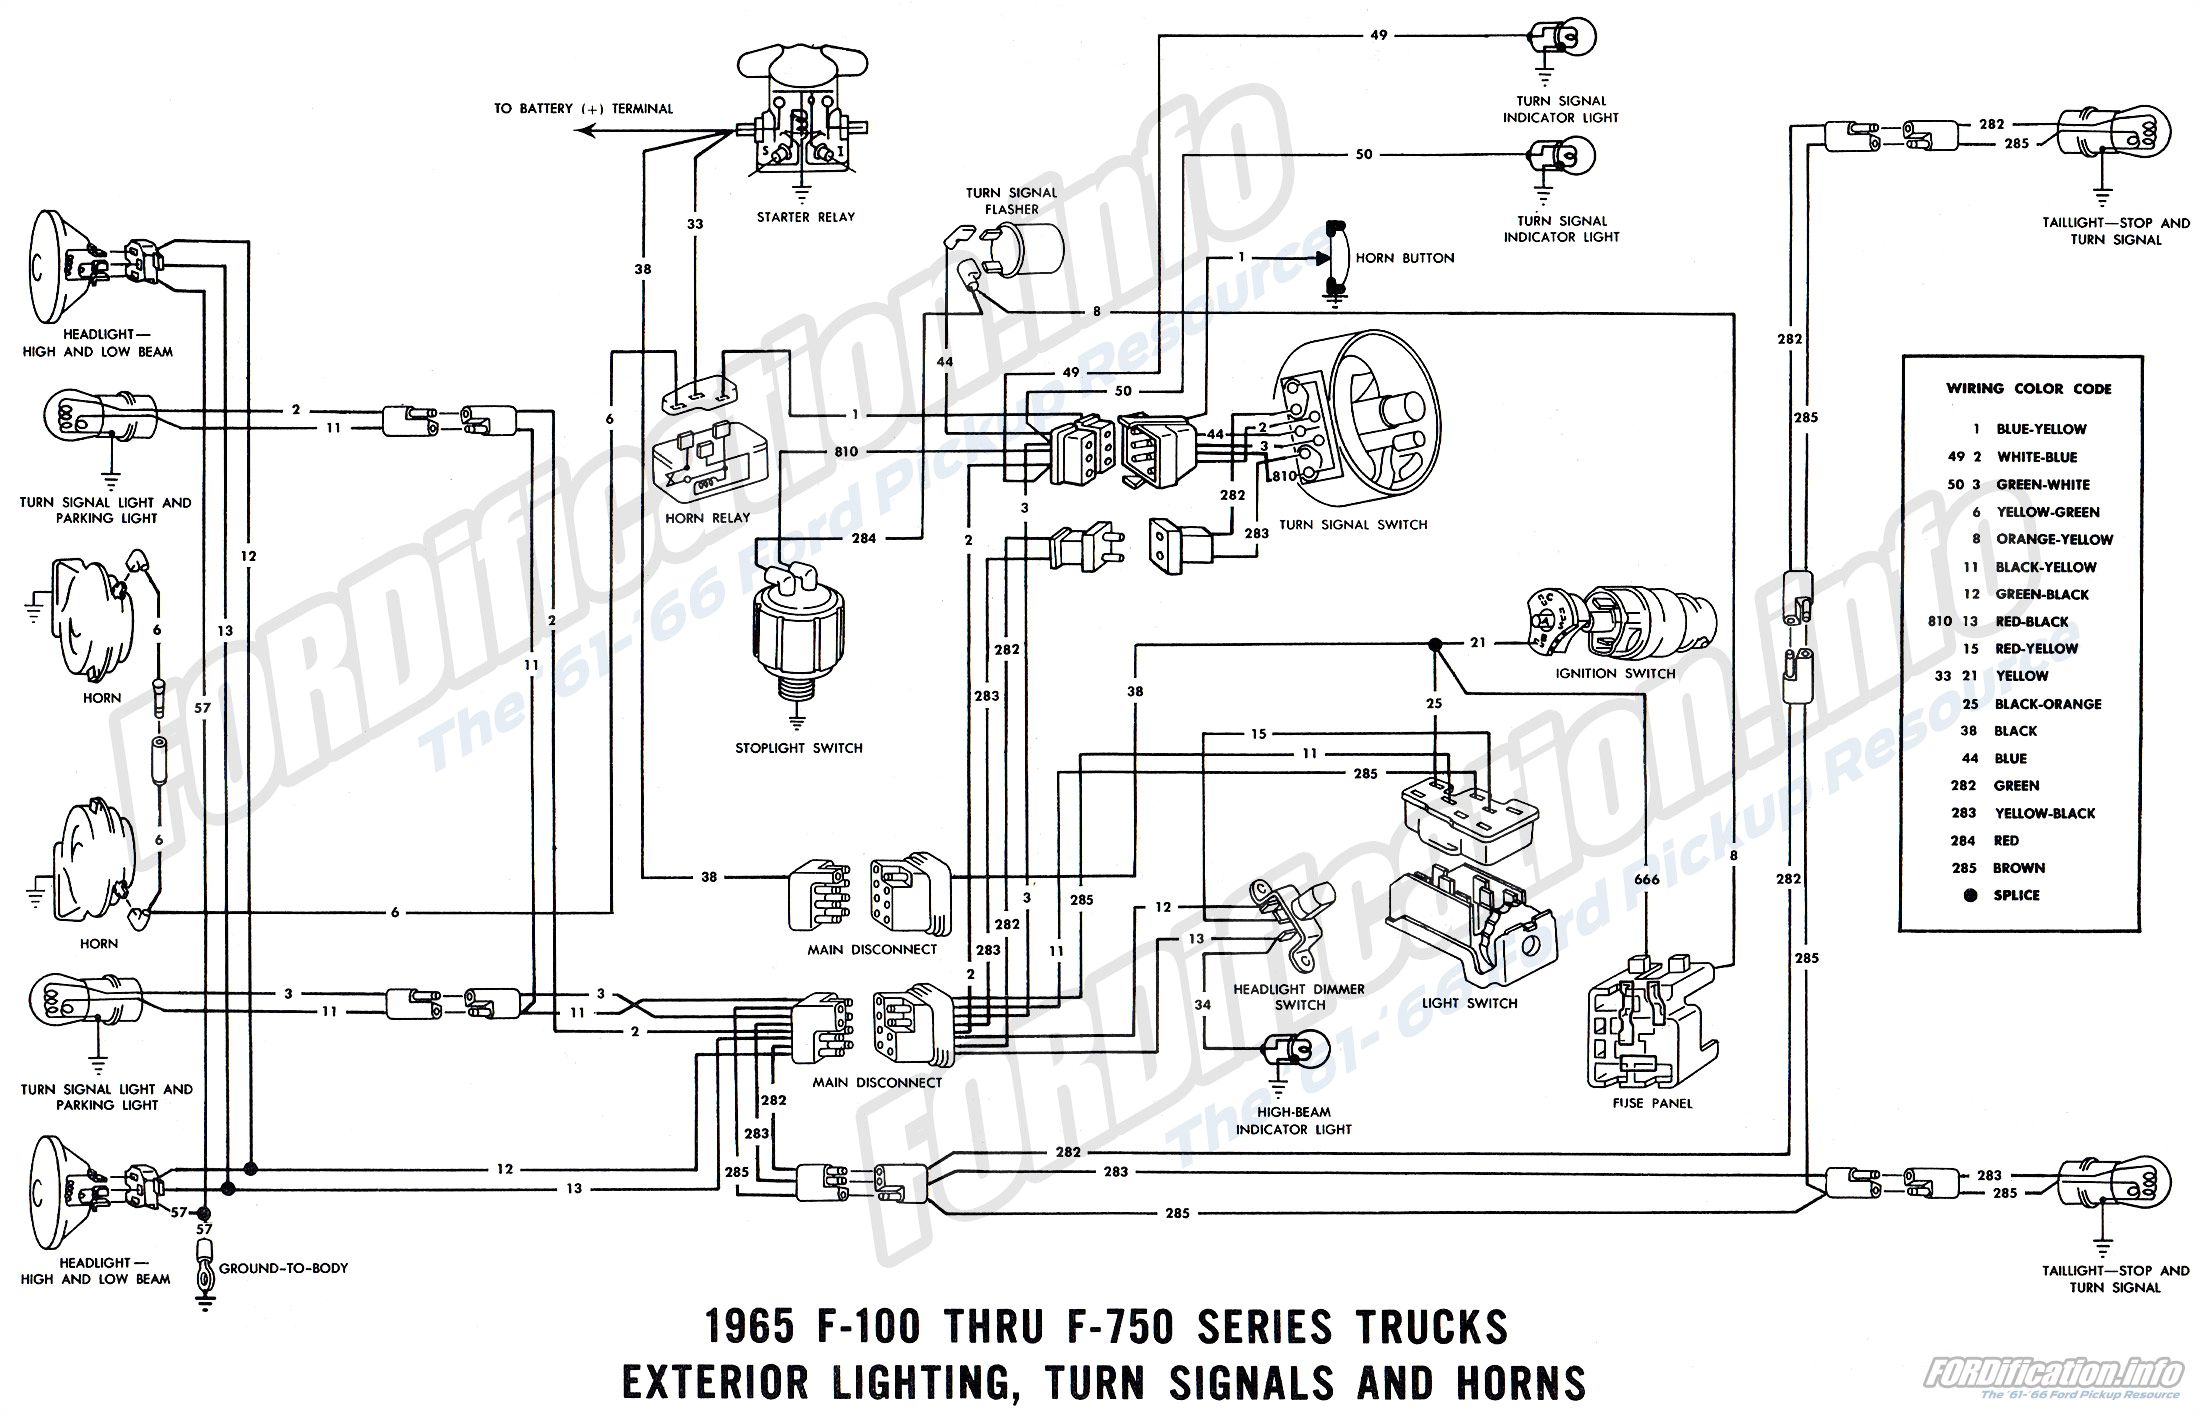 1965 ford truck wiring diagrams fordification info the 61 66 65 ford f100 wiring diagram 65 ford f100 wiring diagram